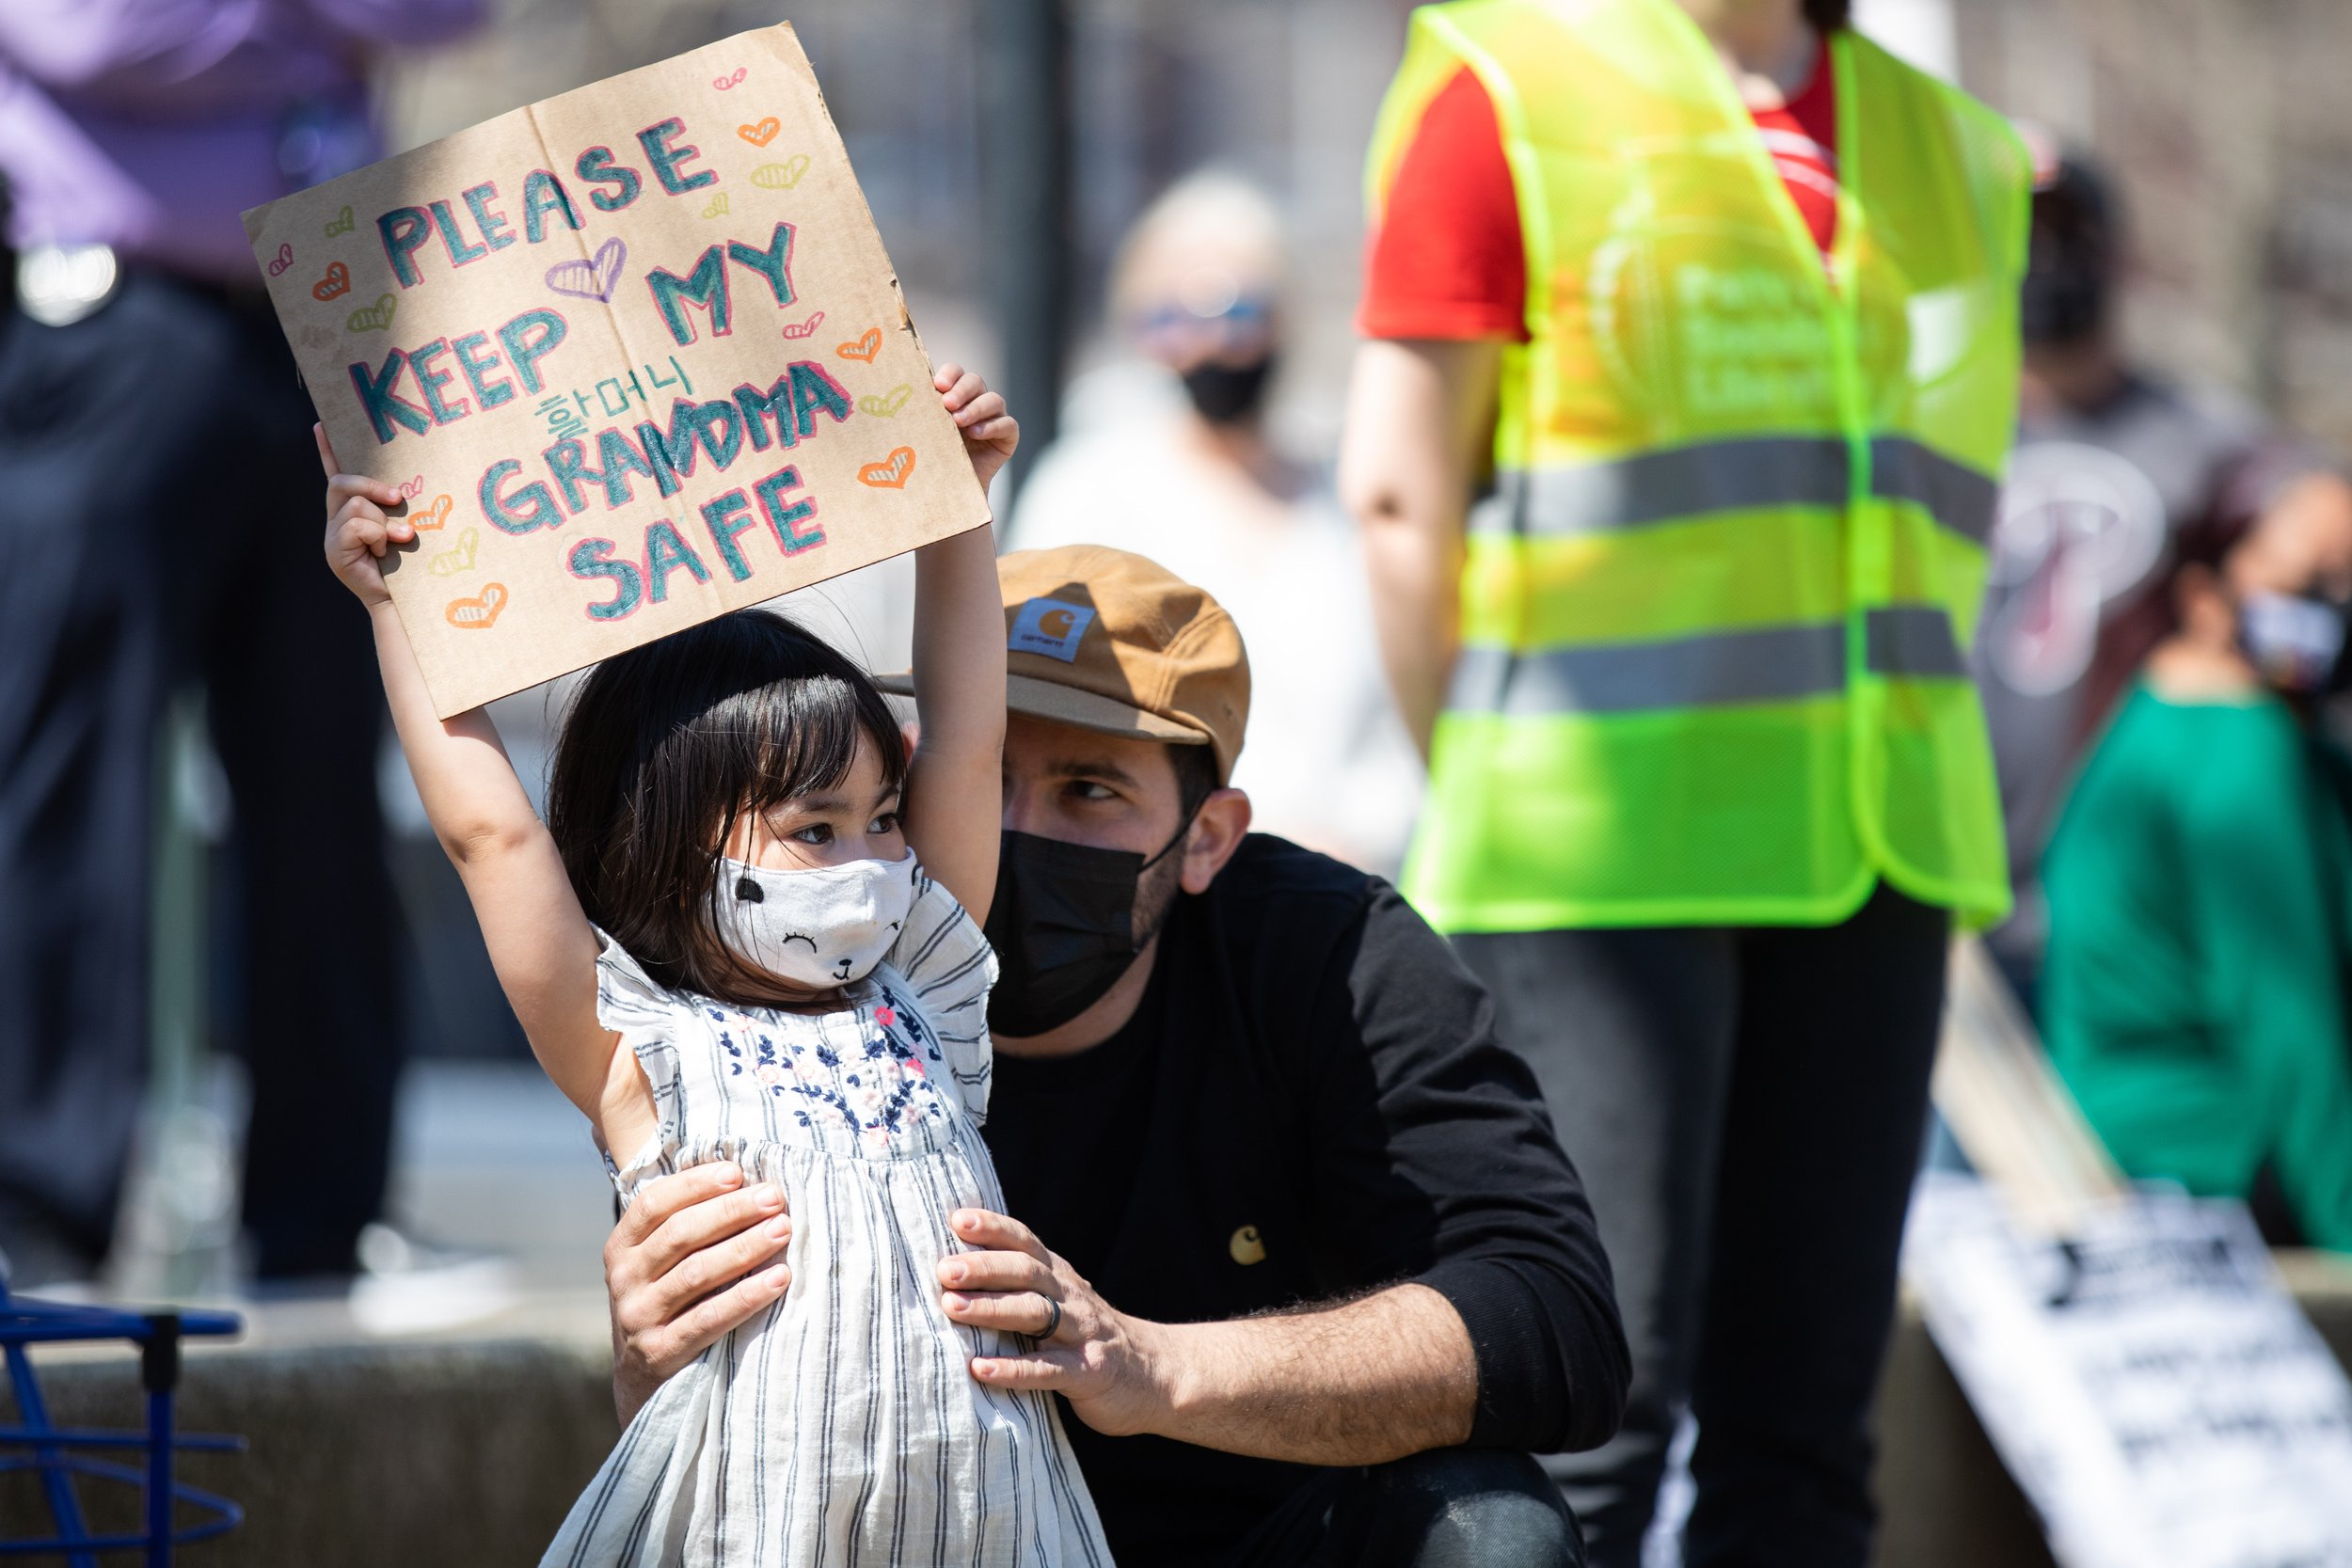   Naomi Klensin (left) stands next to her father, Jacob Klensin, holding a sign that reads “Please keep my grandma safe” at the National Day of Action Against Asian Hate protest at Franklin Square in Philadelphia on March 27, 2021.  